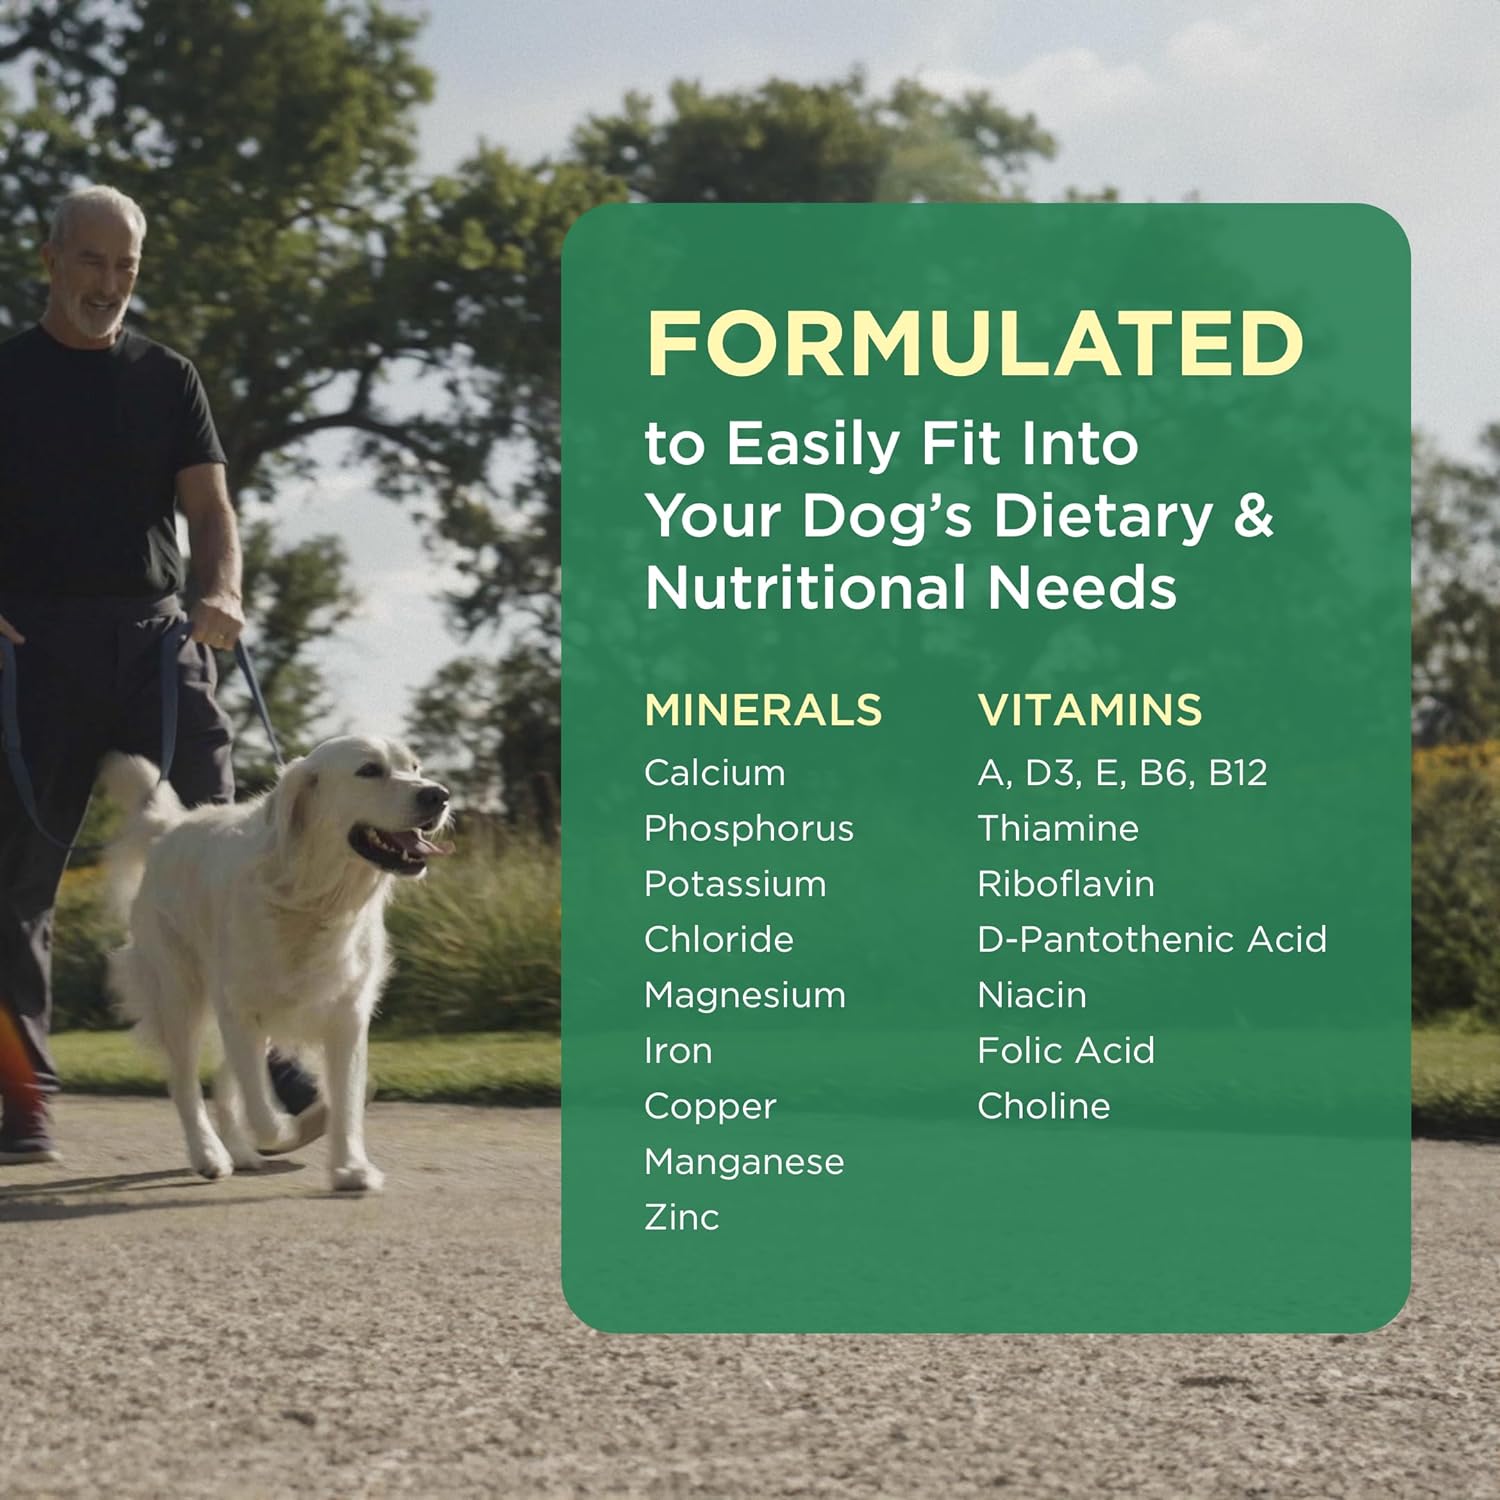 Pet-Tabs Plus Multivitamin and Mineral Supplement for Dogs with Special Nutritional Needs, Chewable Tablet, 180 Count Bottle : Pet Multivitamins : Pet Supplies